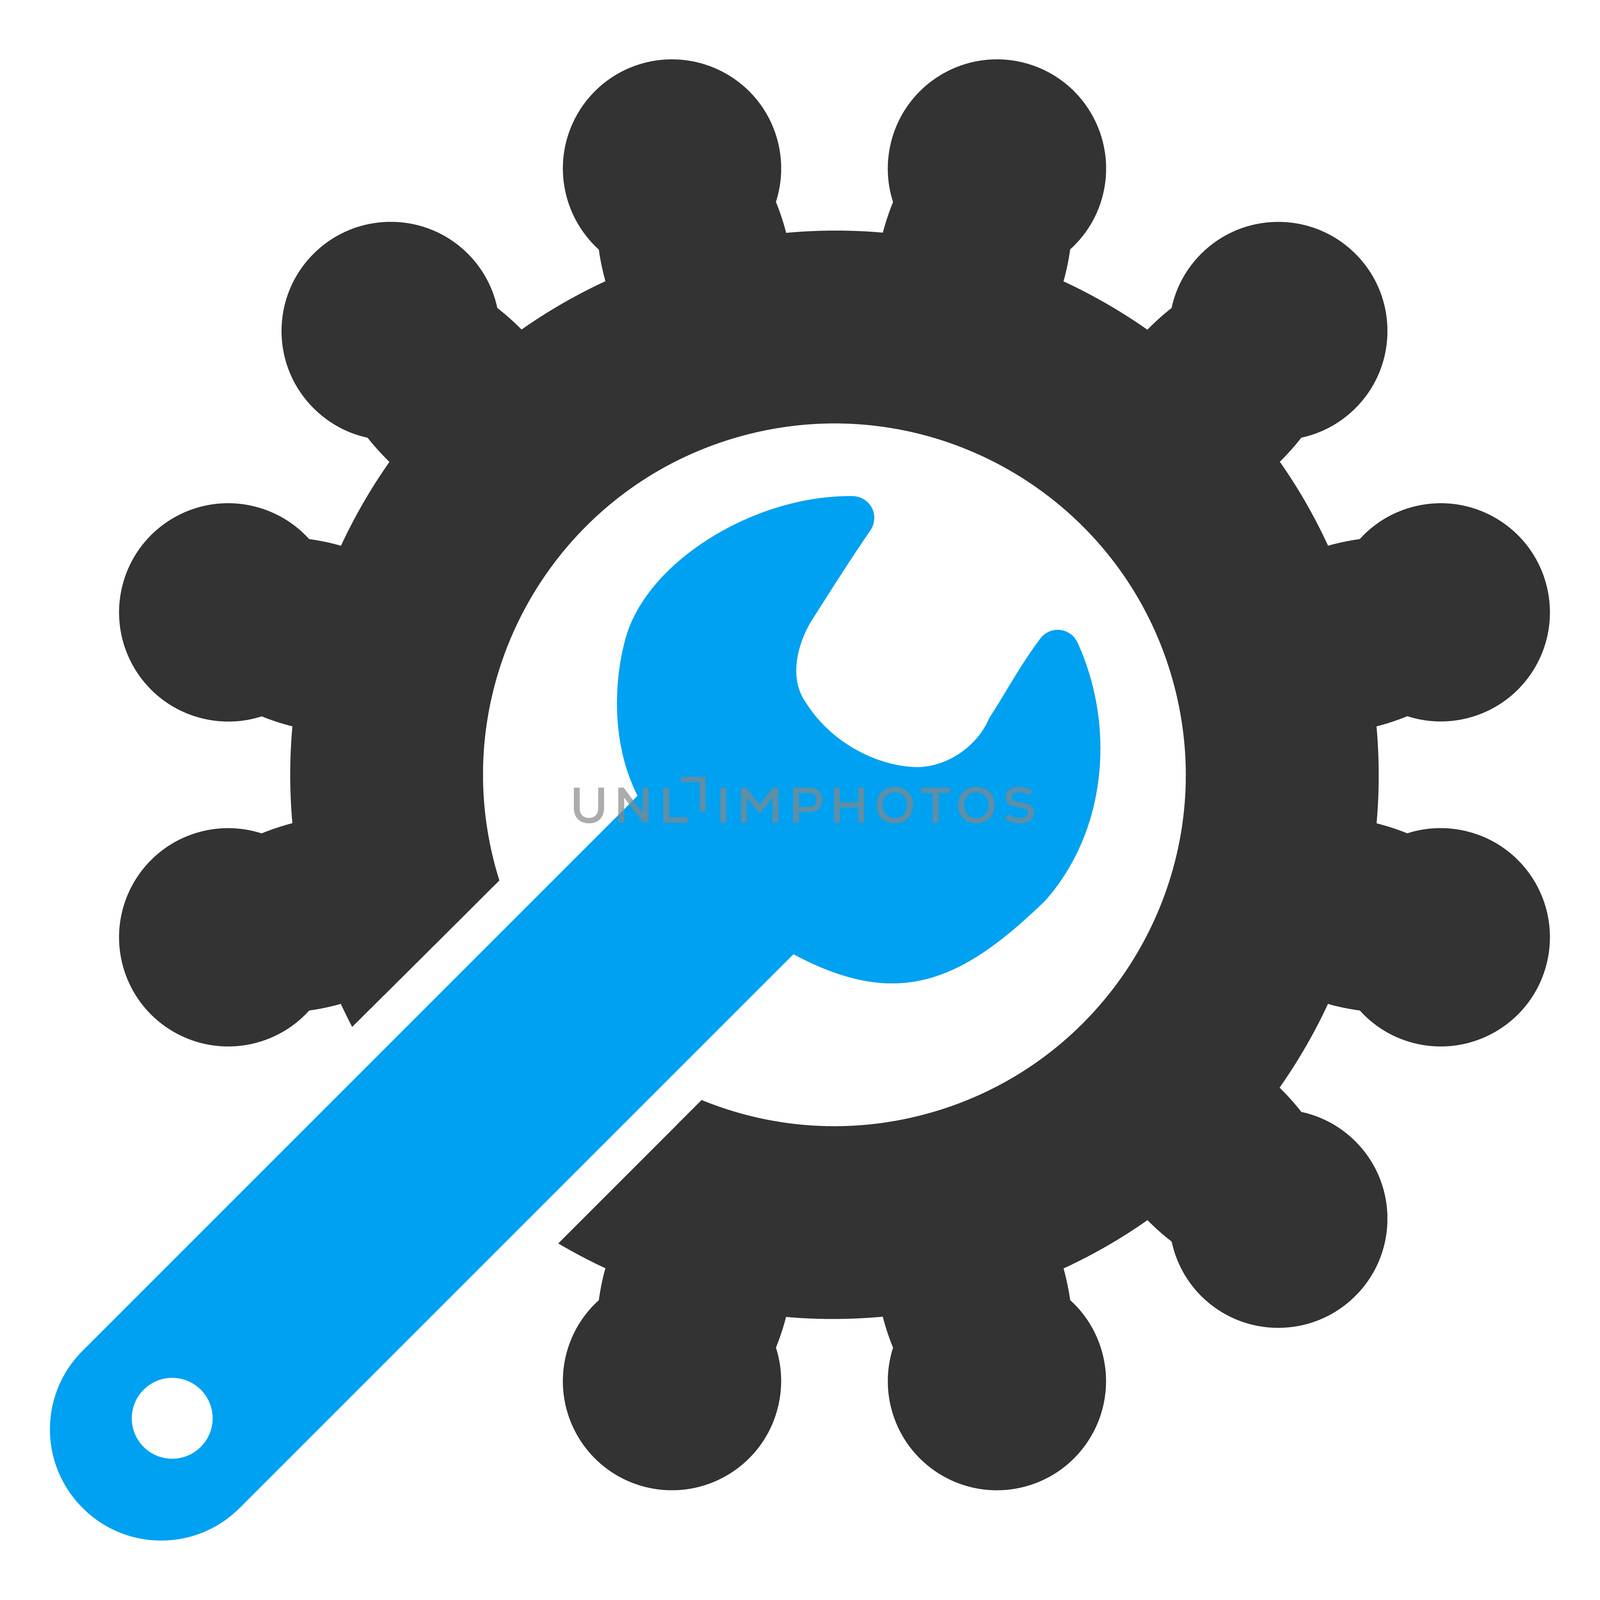 Customization icon from Business Bicolor Set by ahasoft